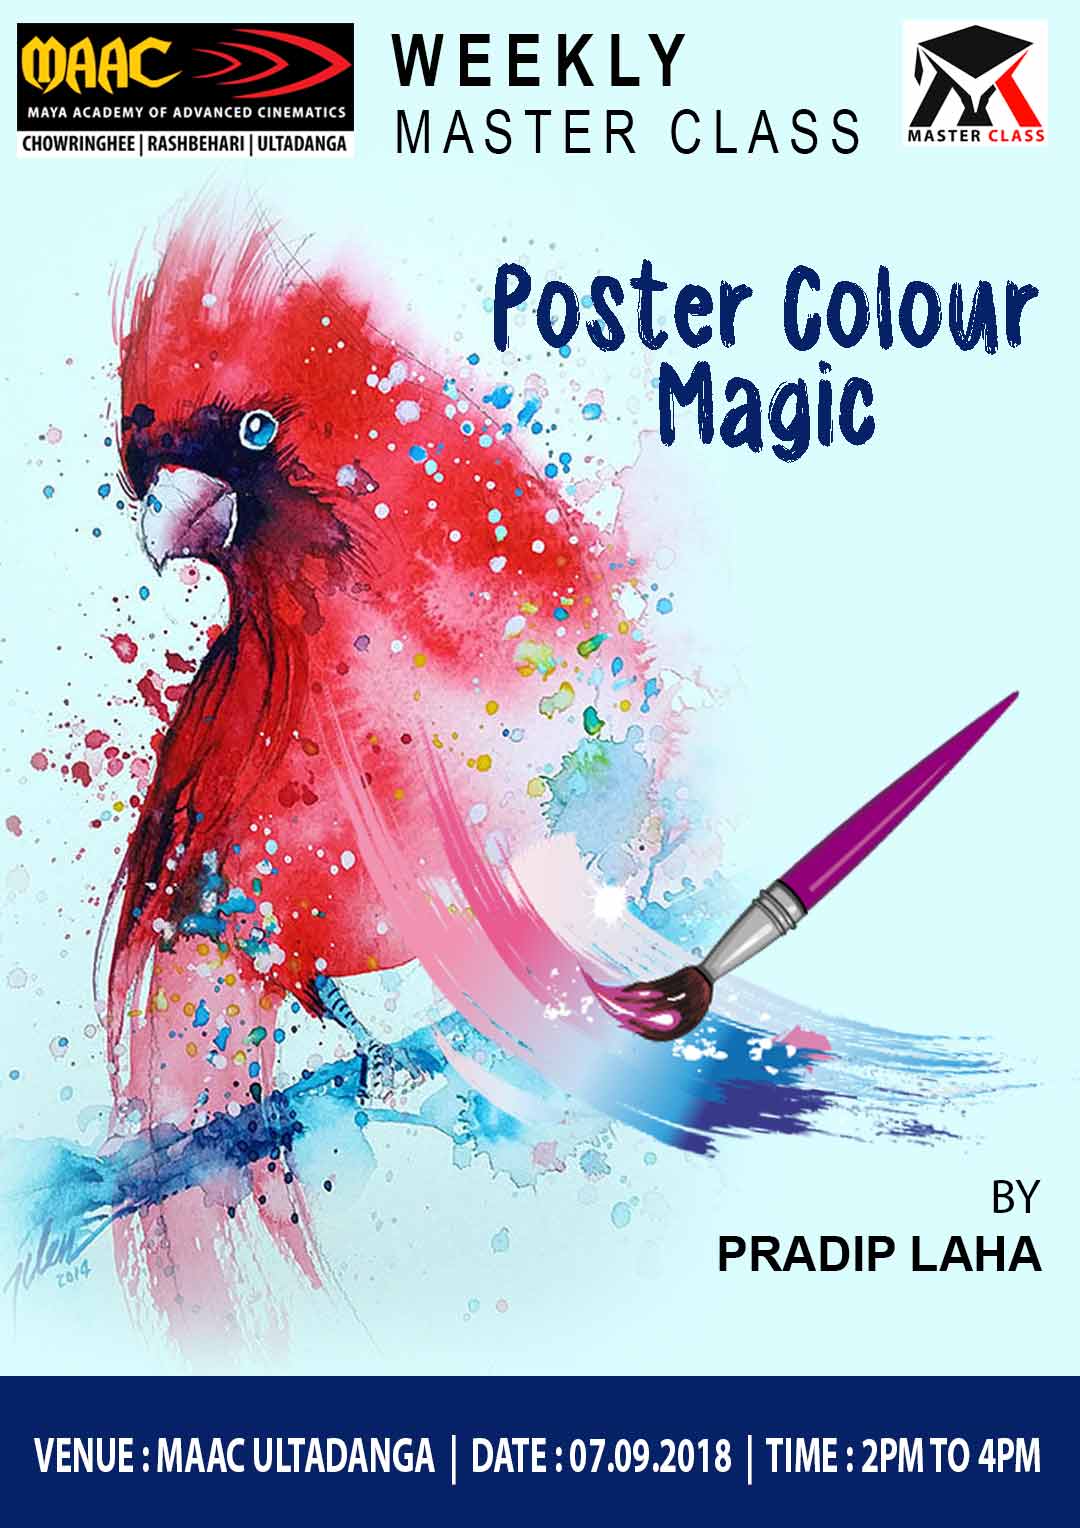 Weekly Master Class on Poster Colour Magic